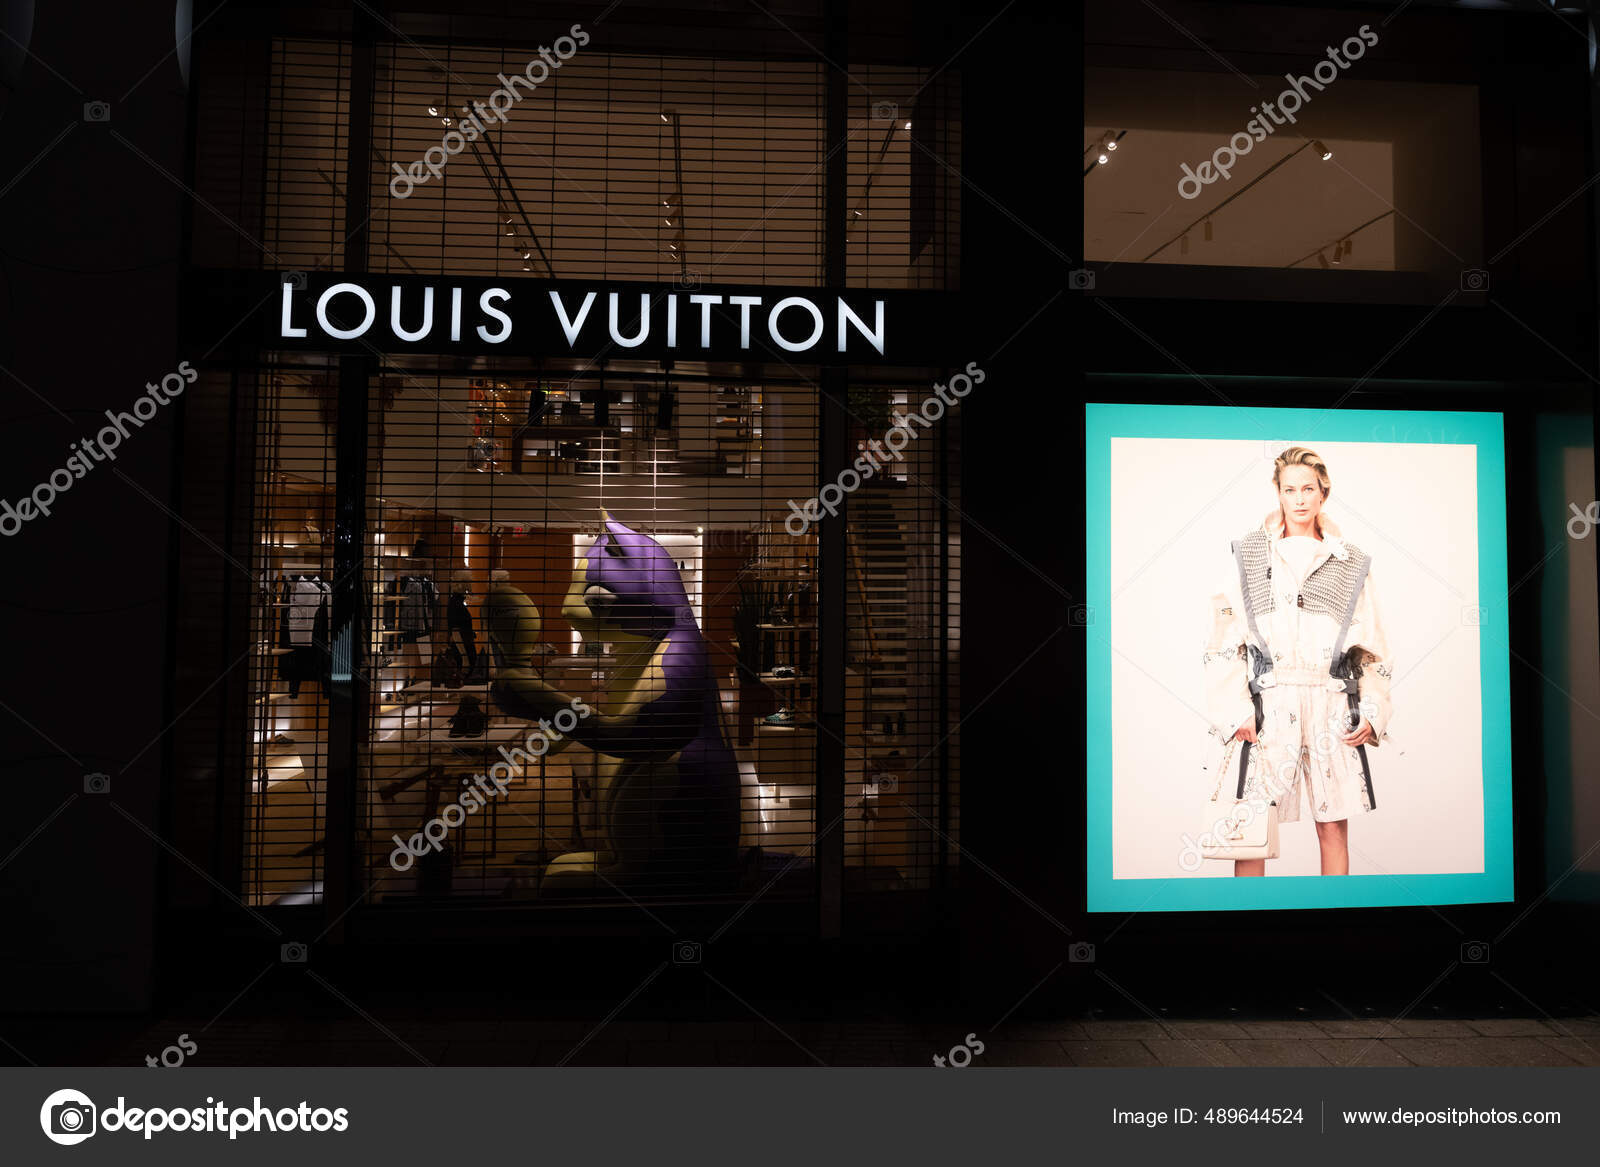 Miami, USA - March 20, 2021: Louis Vuitton night storefront at